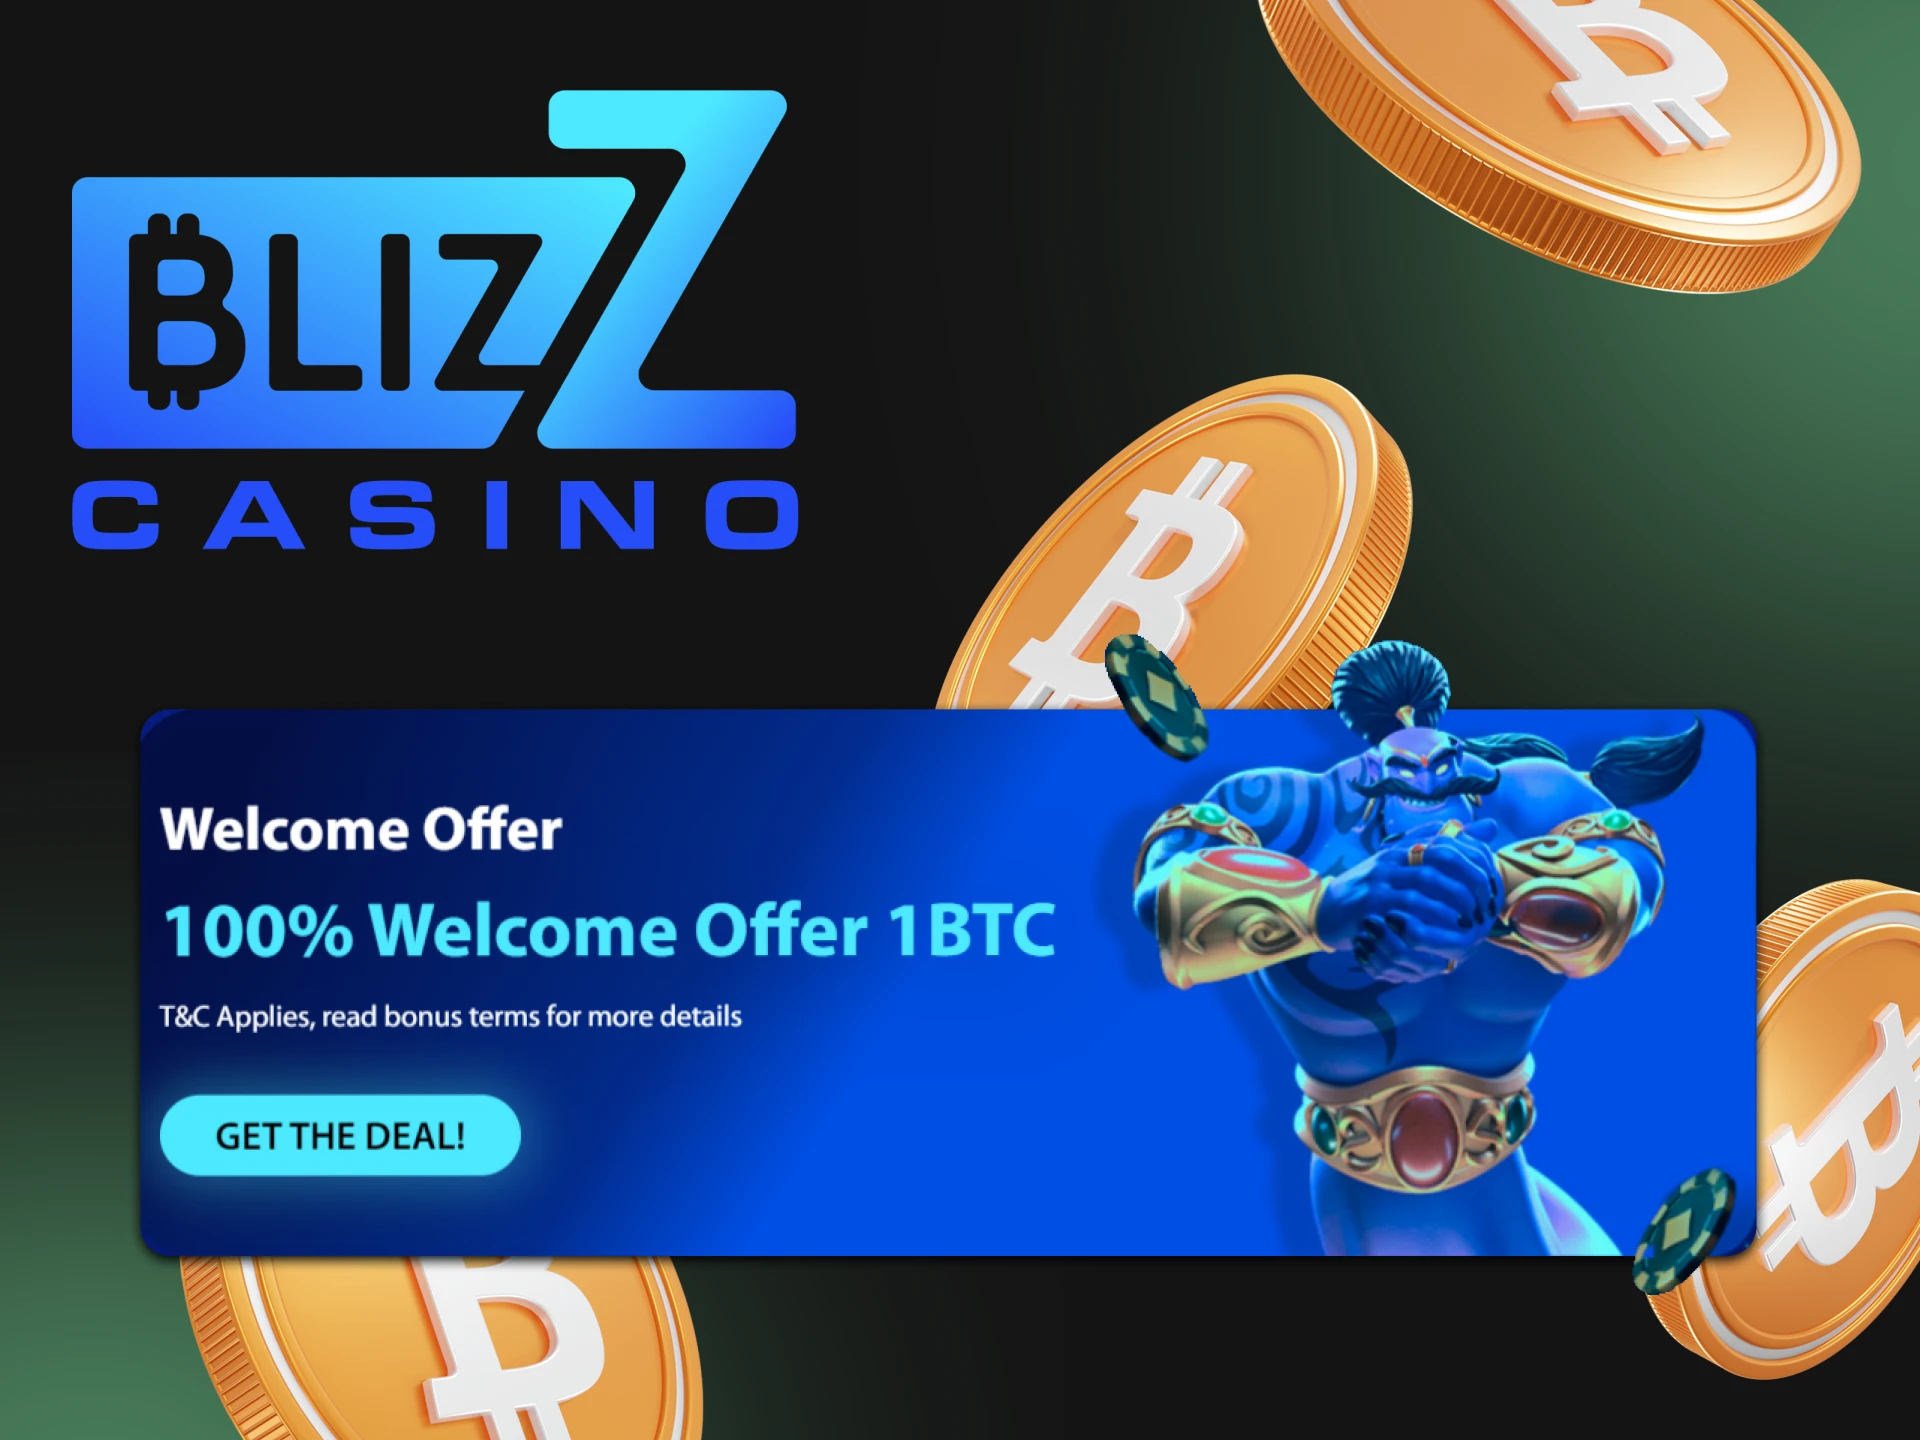 Get your welcome bonus at Blizz.io crypto casino and start playing.